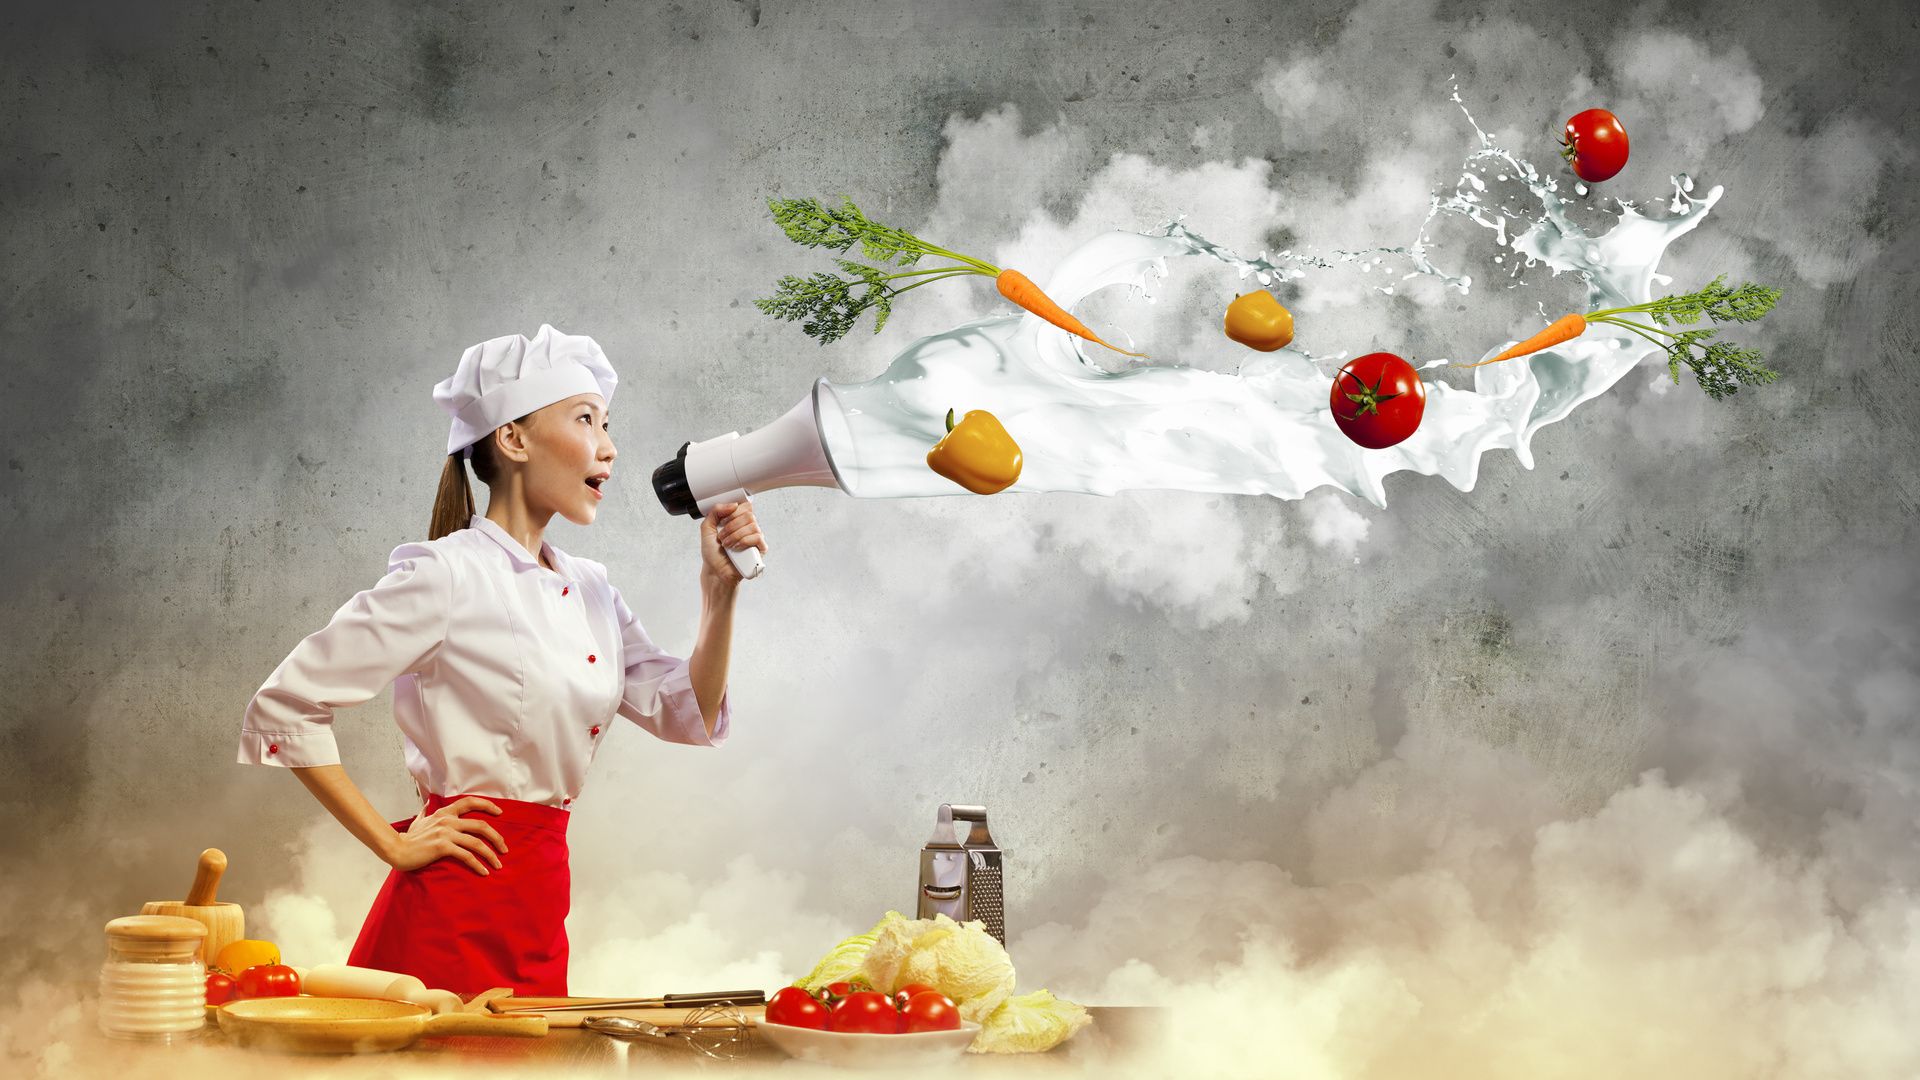 Cooking Background. Cooking Wallpaper